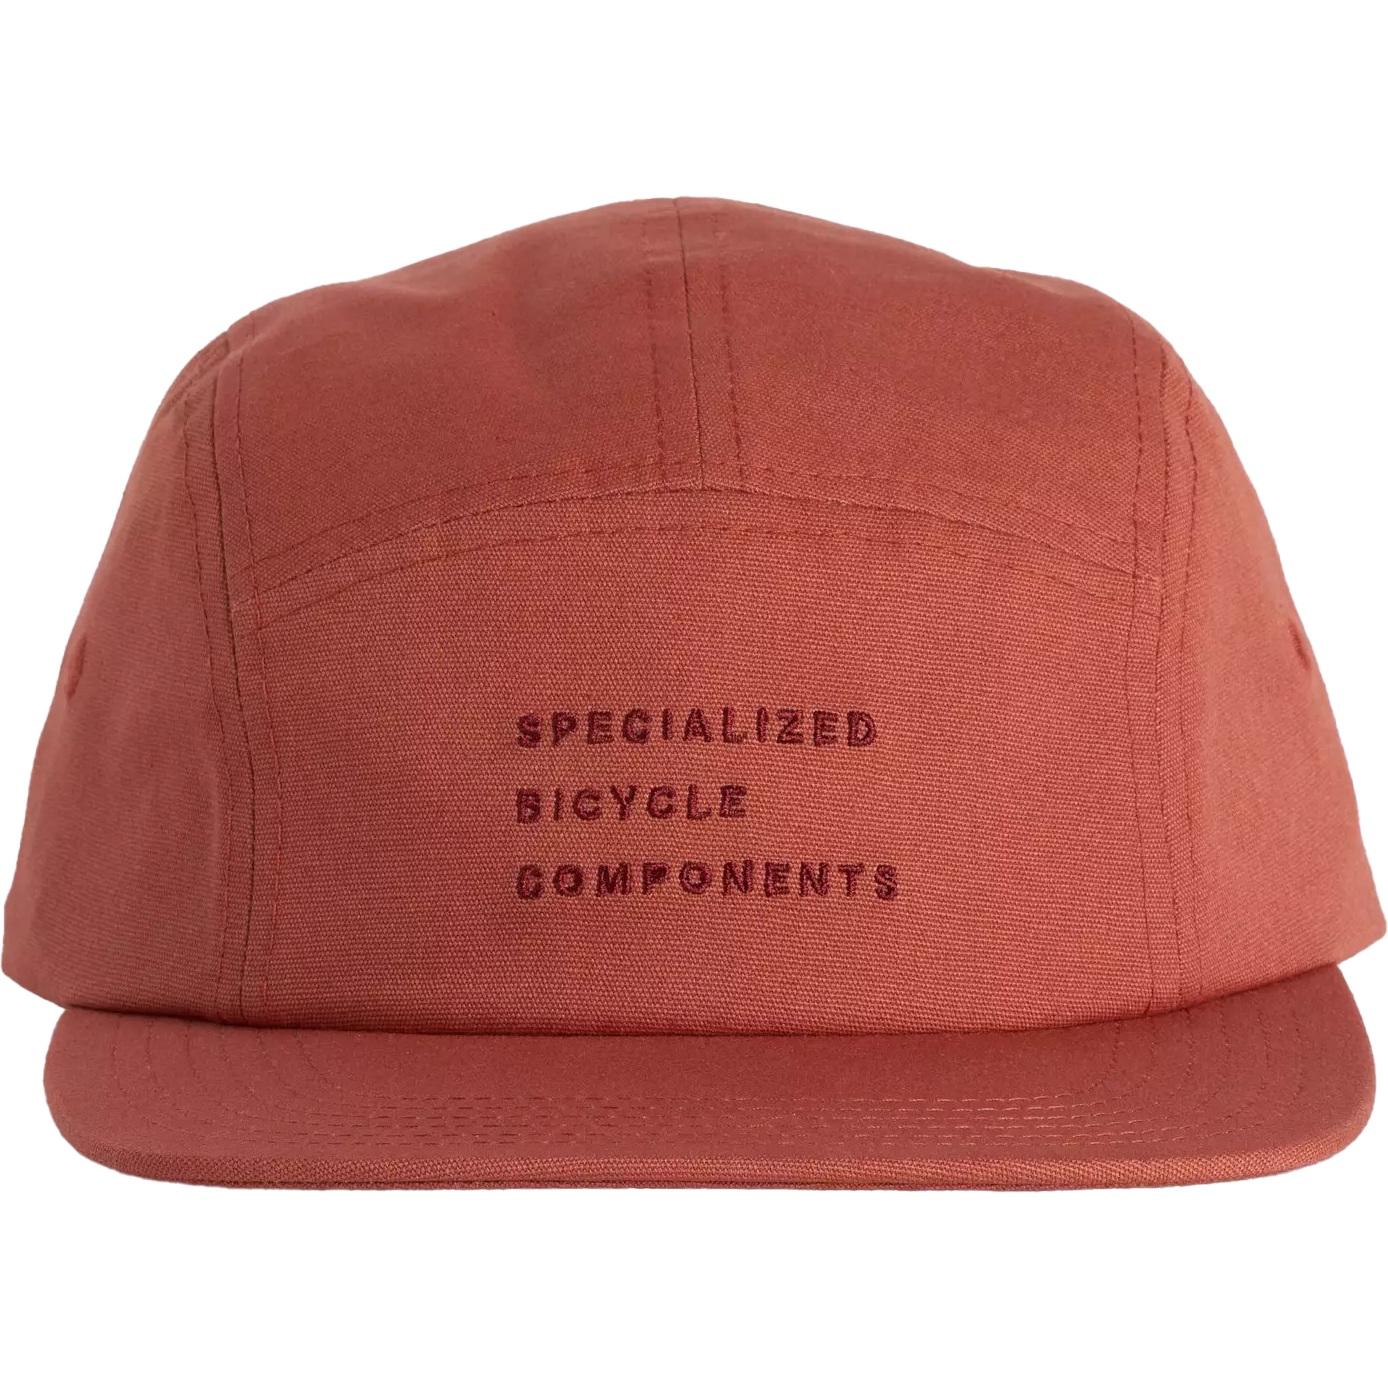 Picture of Specialized SBC Graphic 5 Panel Camper Hat - terra cotta